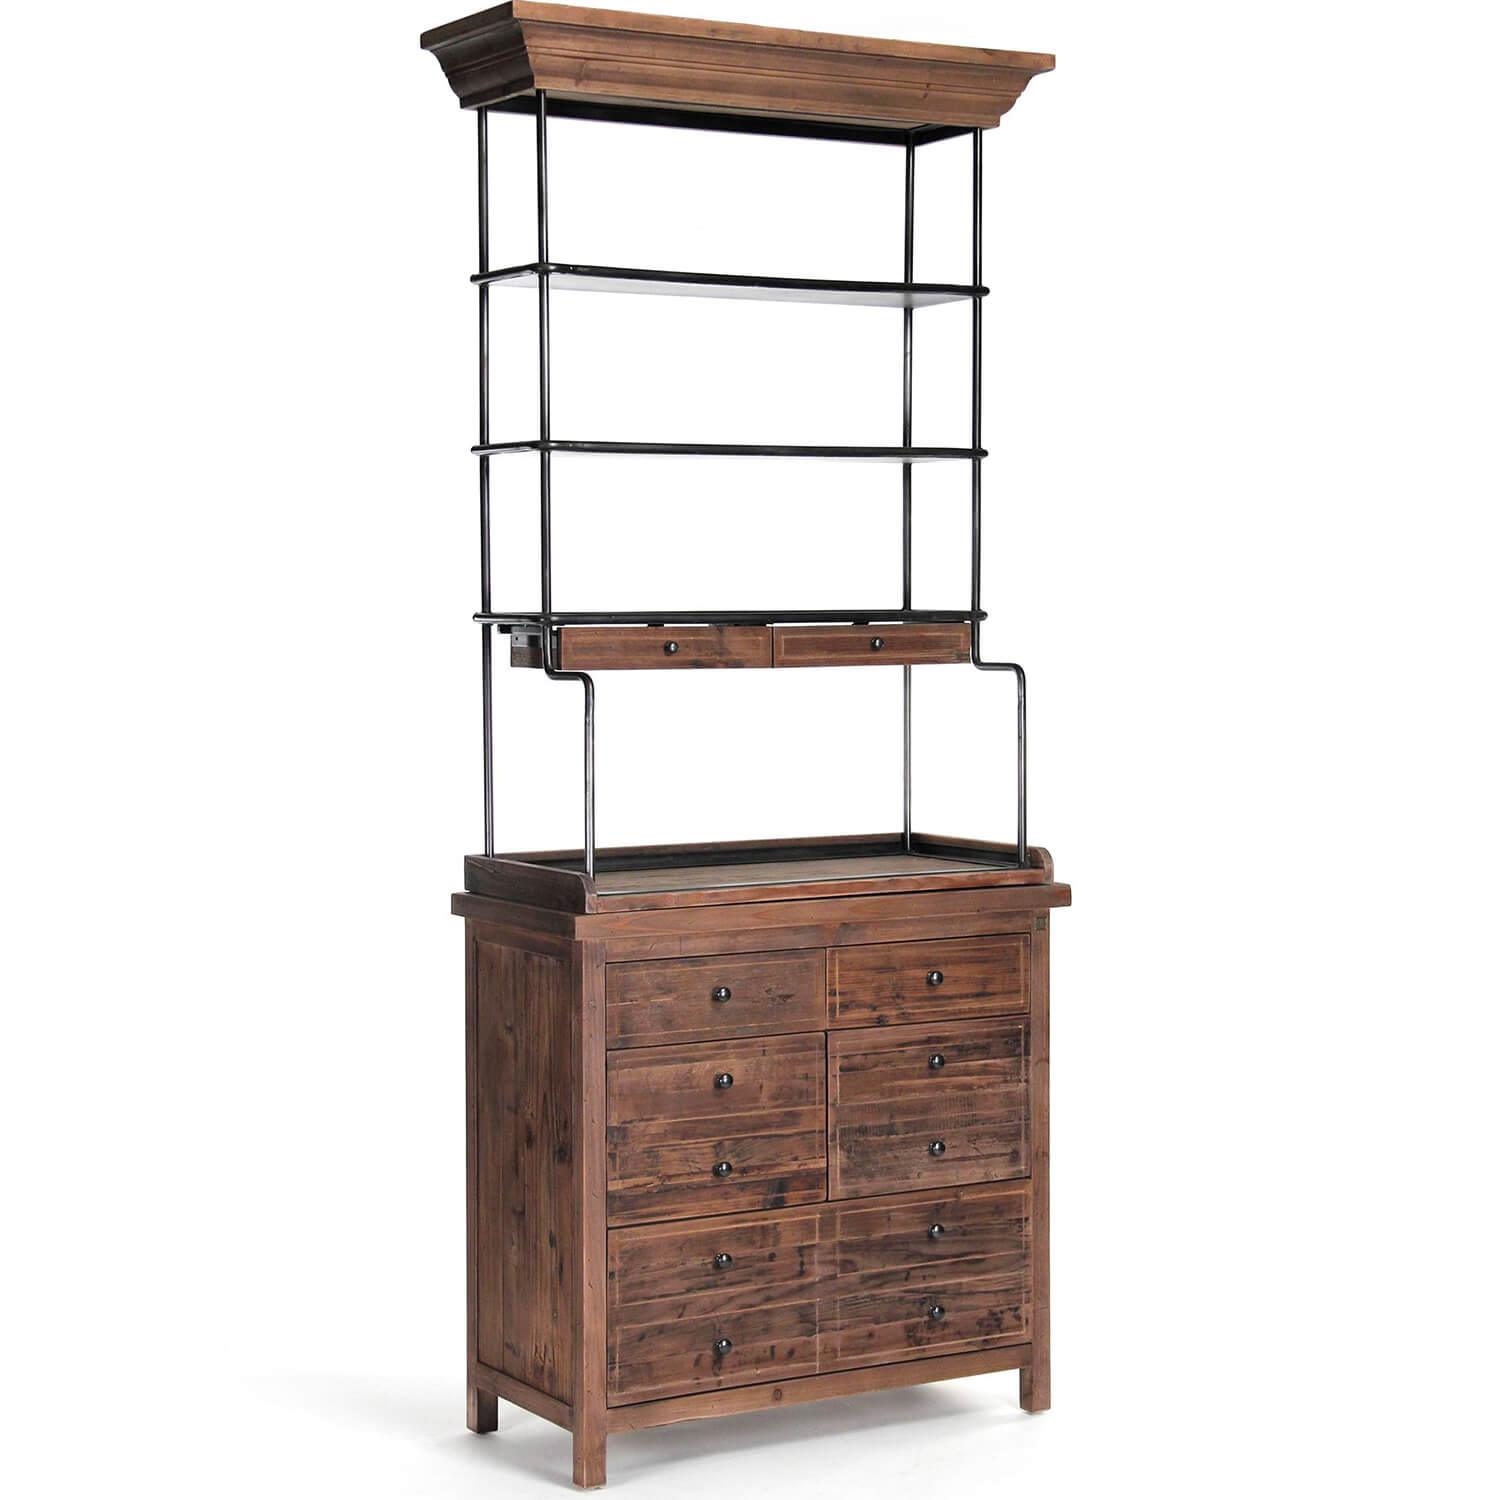 Rustic Wood and Metal Cabinet - Belle Escape